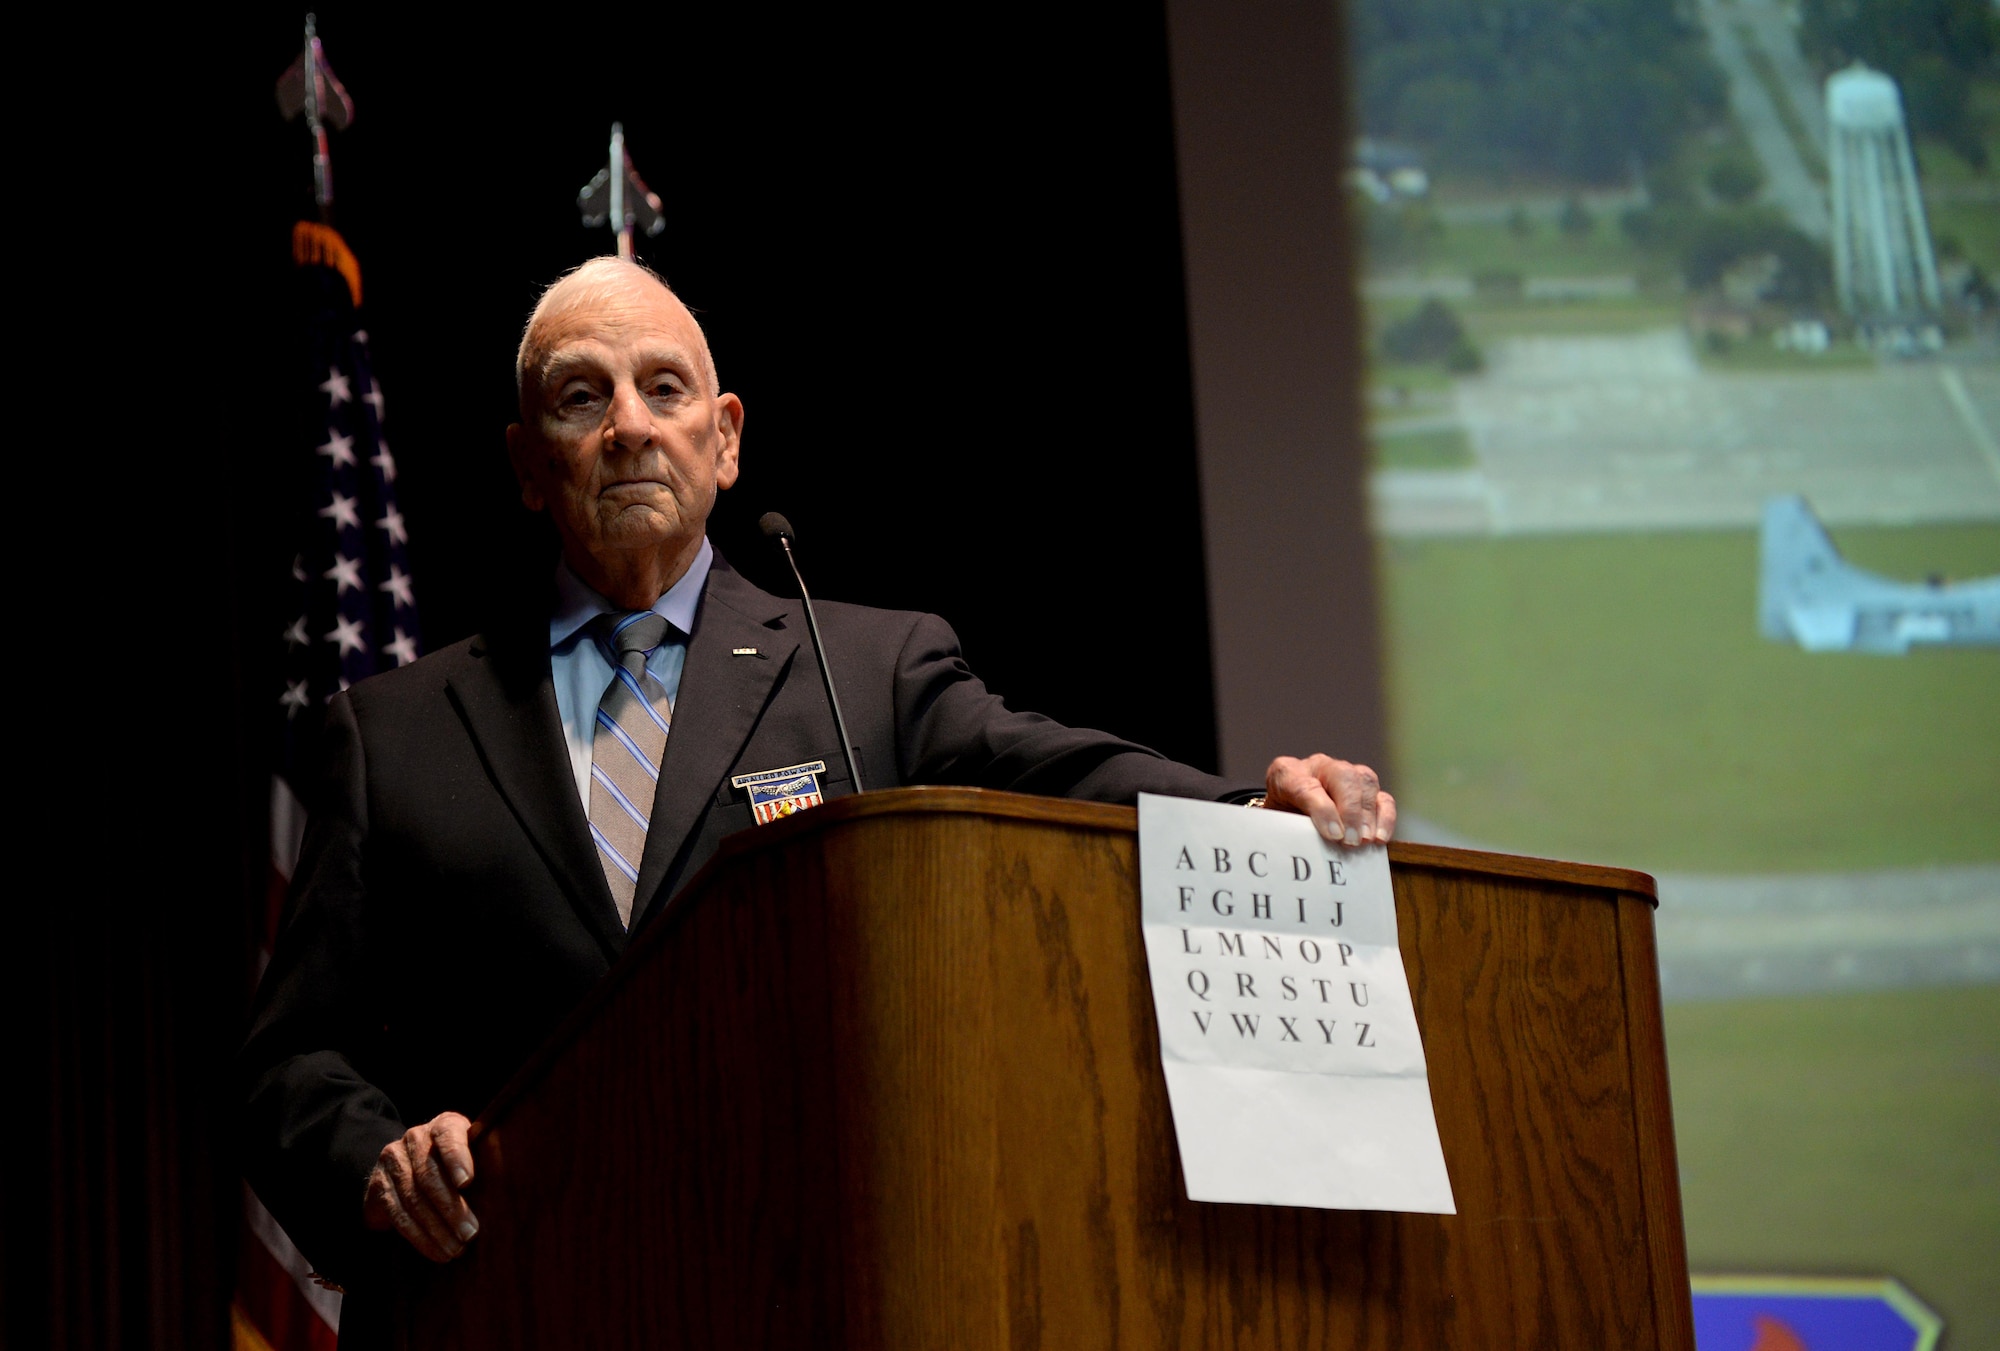 Retired Col. Carlyle “Smitty” Harris, former Vietnam War prisoner of war, speaks to Specialized Undergraduate Pilot Training Class 18-06’s graduation audience about the TAP code March 9, 2018, on Columbus Air Force Base, Mississippi. He spoke to the class about his time as a POW and recounted how his success throughout his life came from the same attributes the pilots have and will continue developed throughout their training. (U.S. Air Force photo by Airman 1st Class Keith Holcomb)